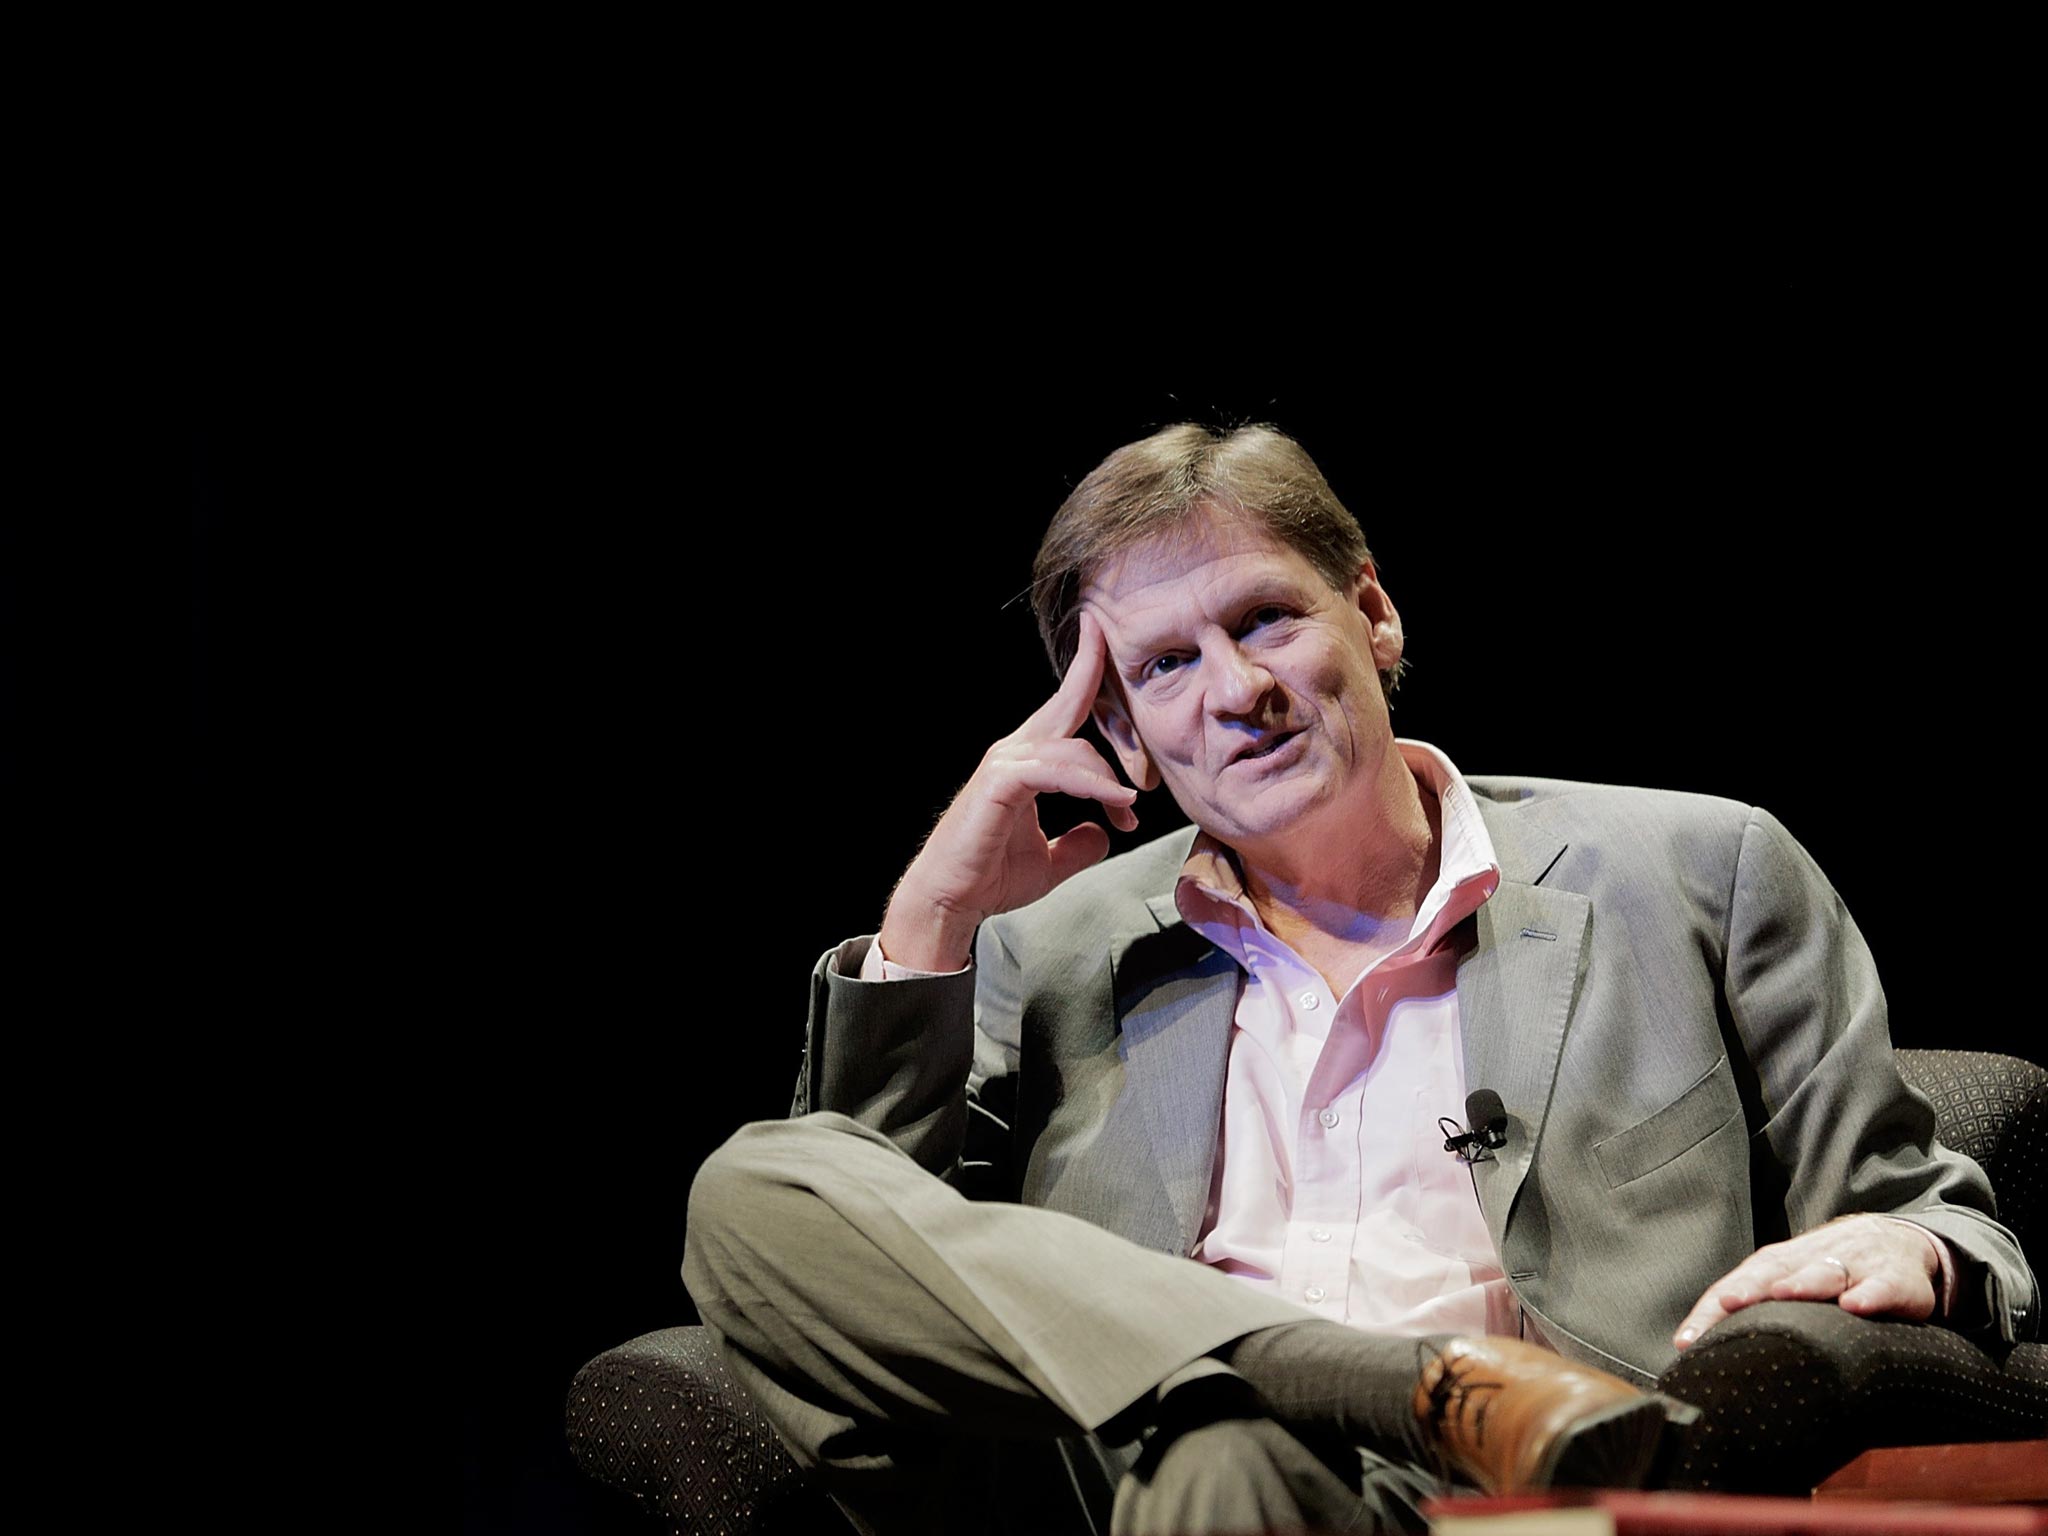 Michael Lewis' book paints a damning picture of high-frequency trading